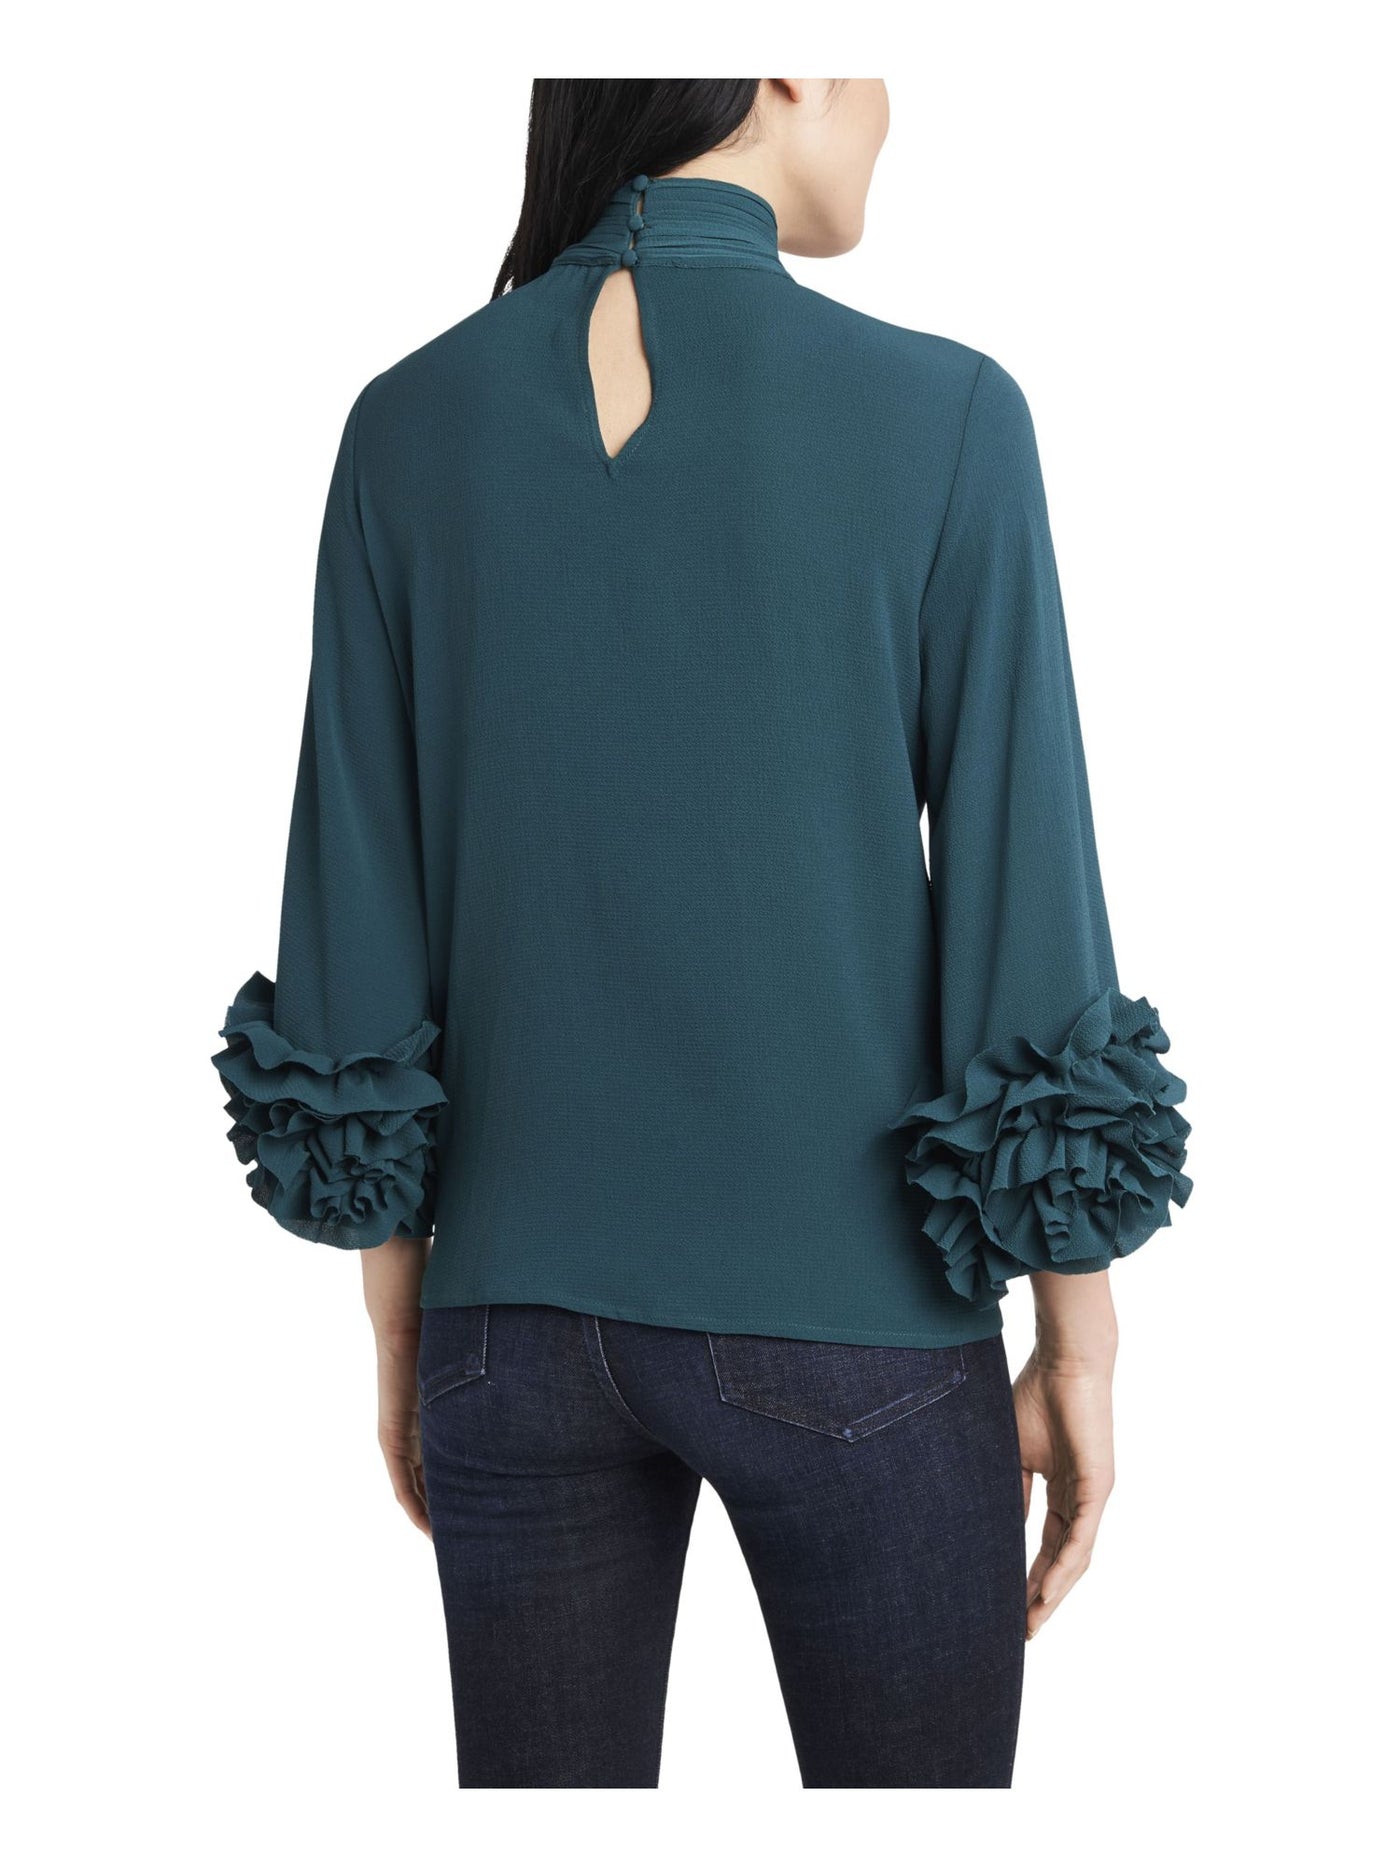 VINCE CAMUTO Womens Green Ruffled Gathered Keyhole Back 3/4 Sleeve Mock Neck Wear To Work Top L